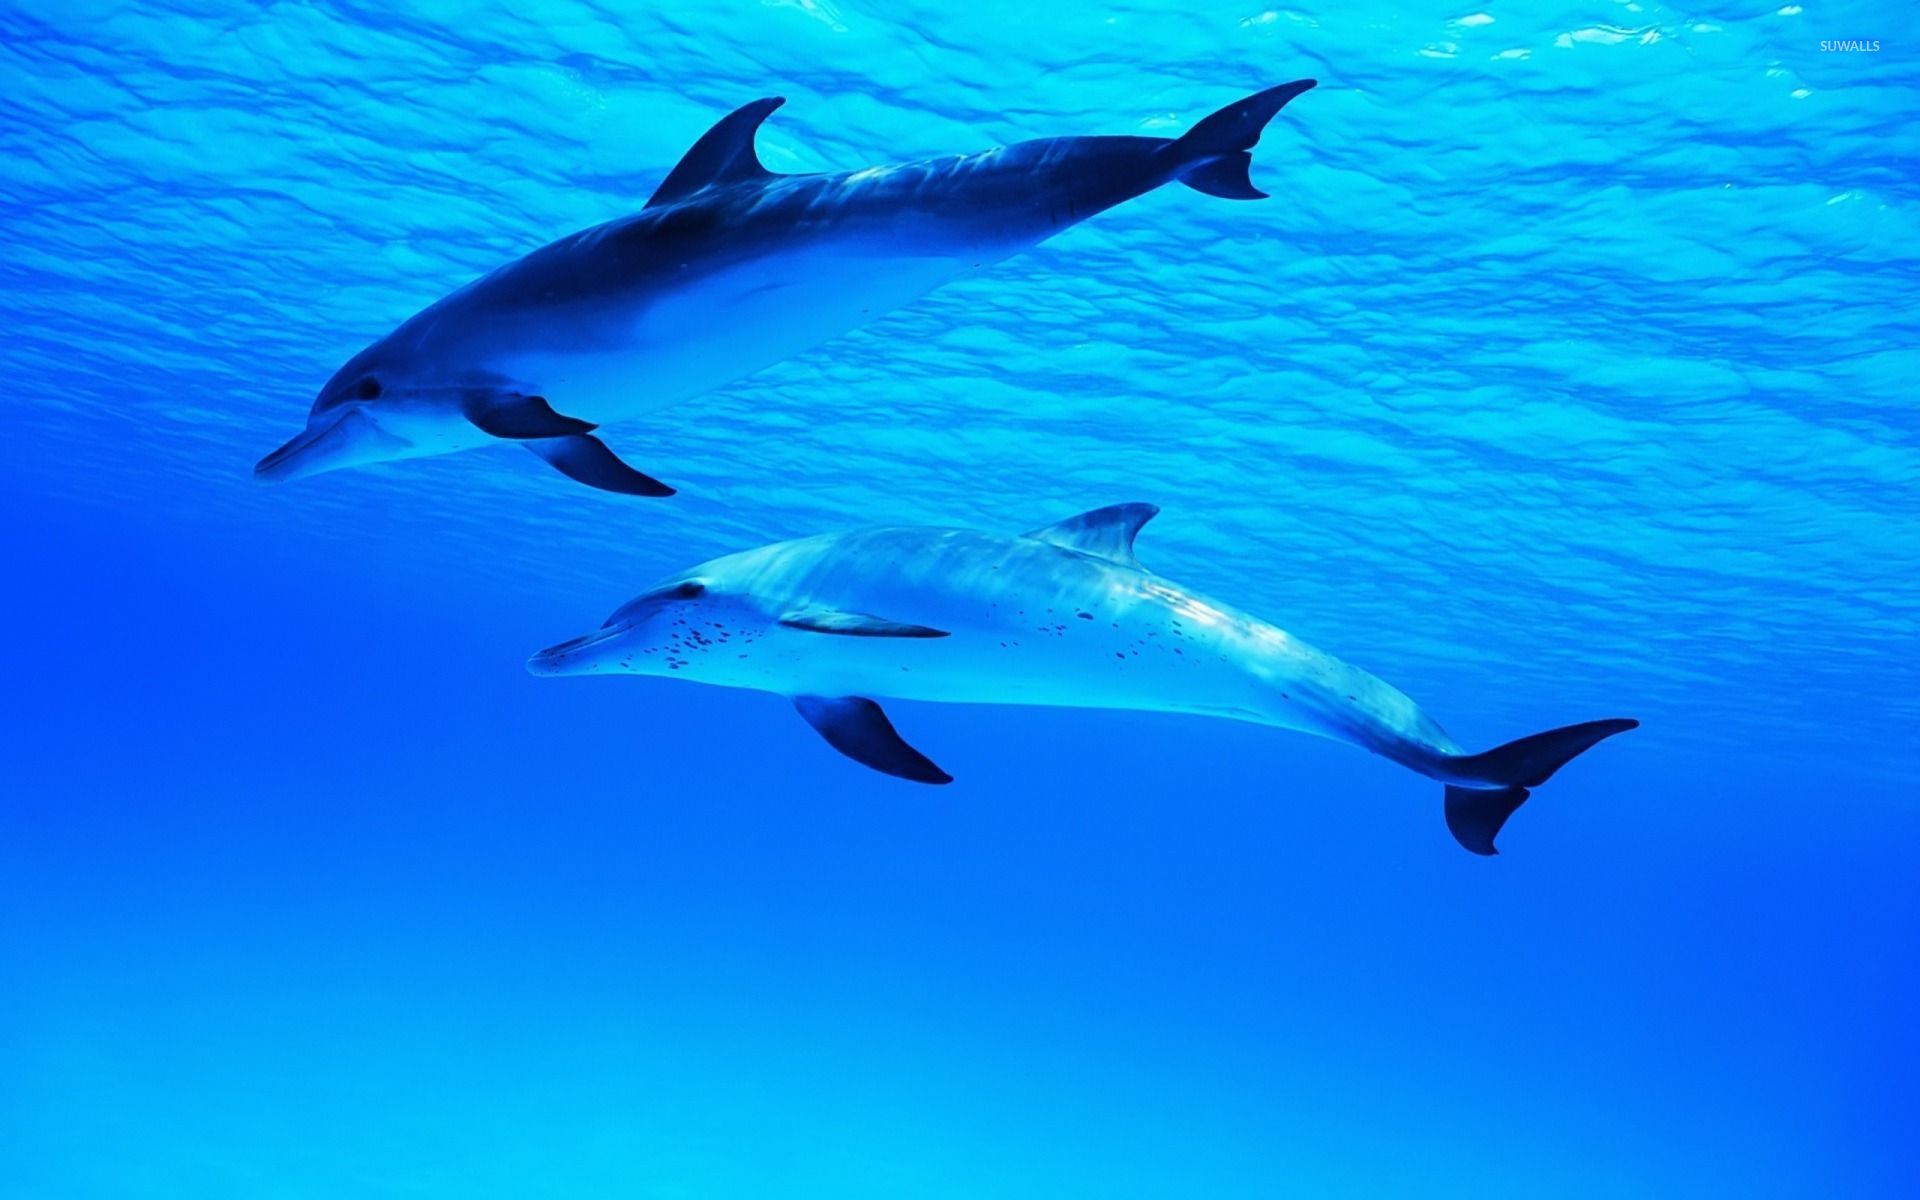 Dolphins under water wallpaper - Animal wallpapers - #49218